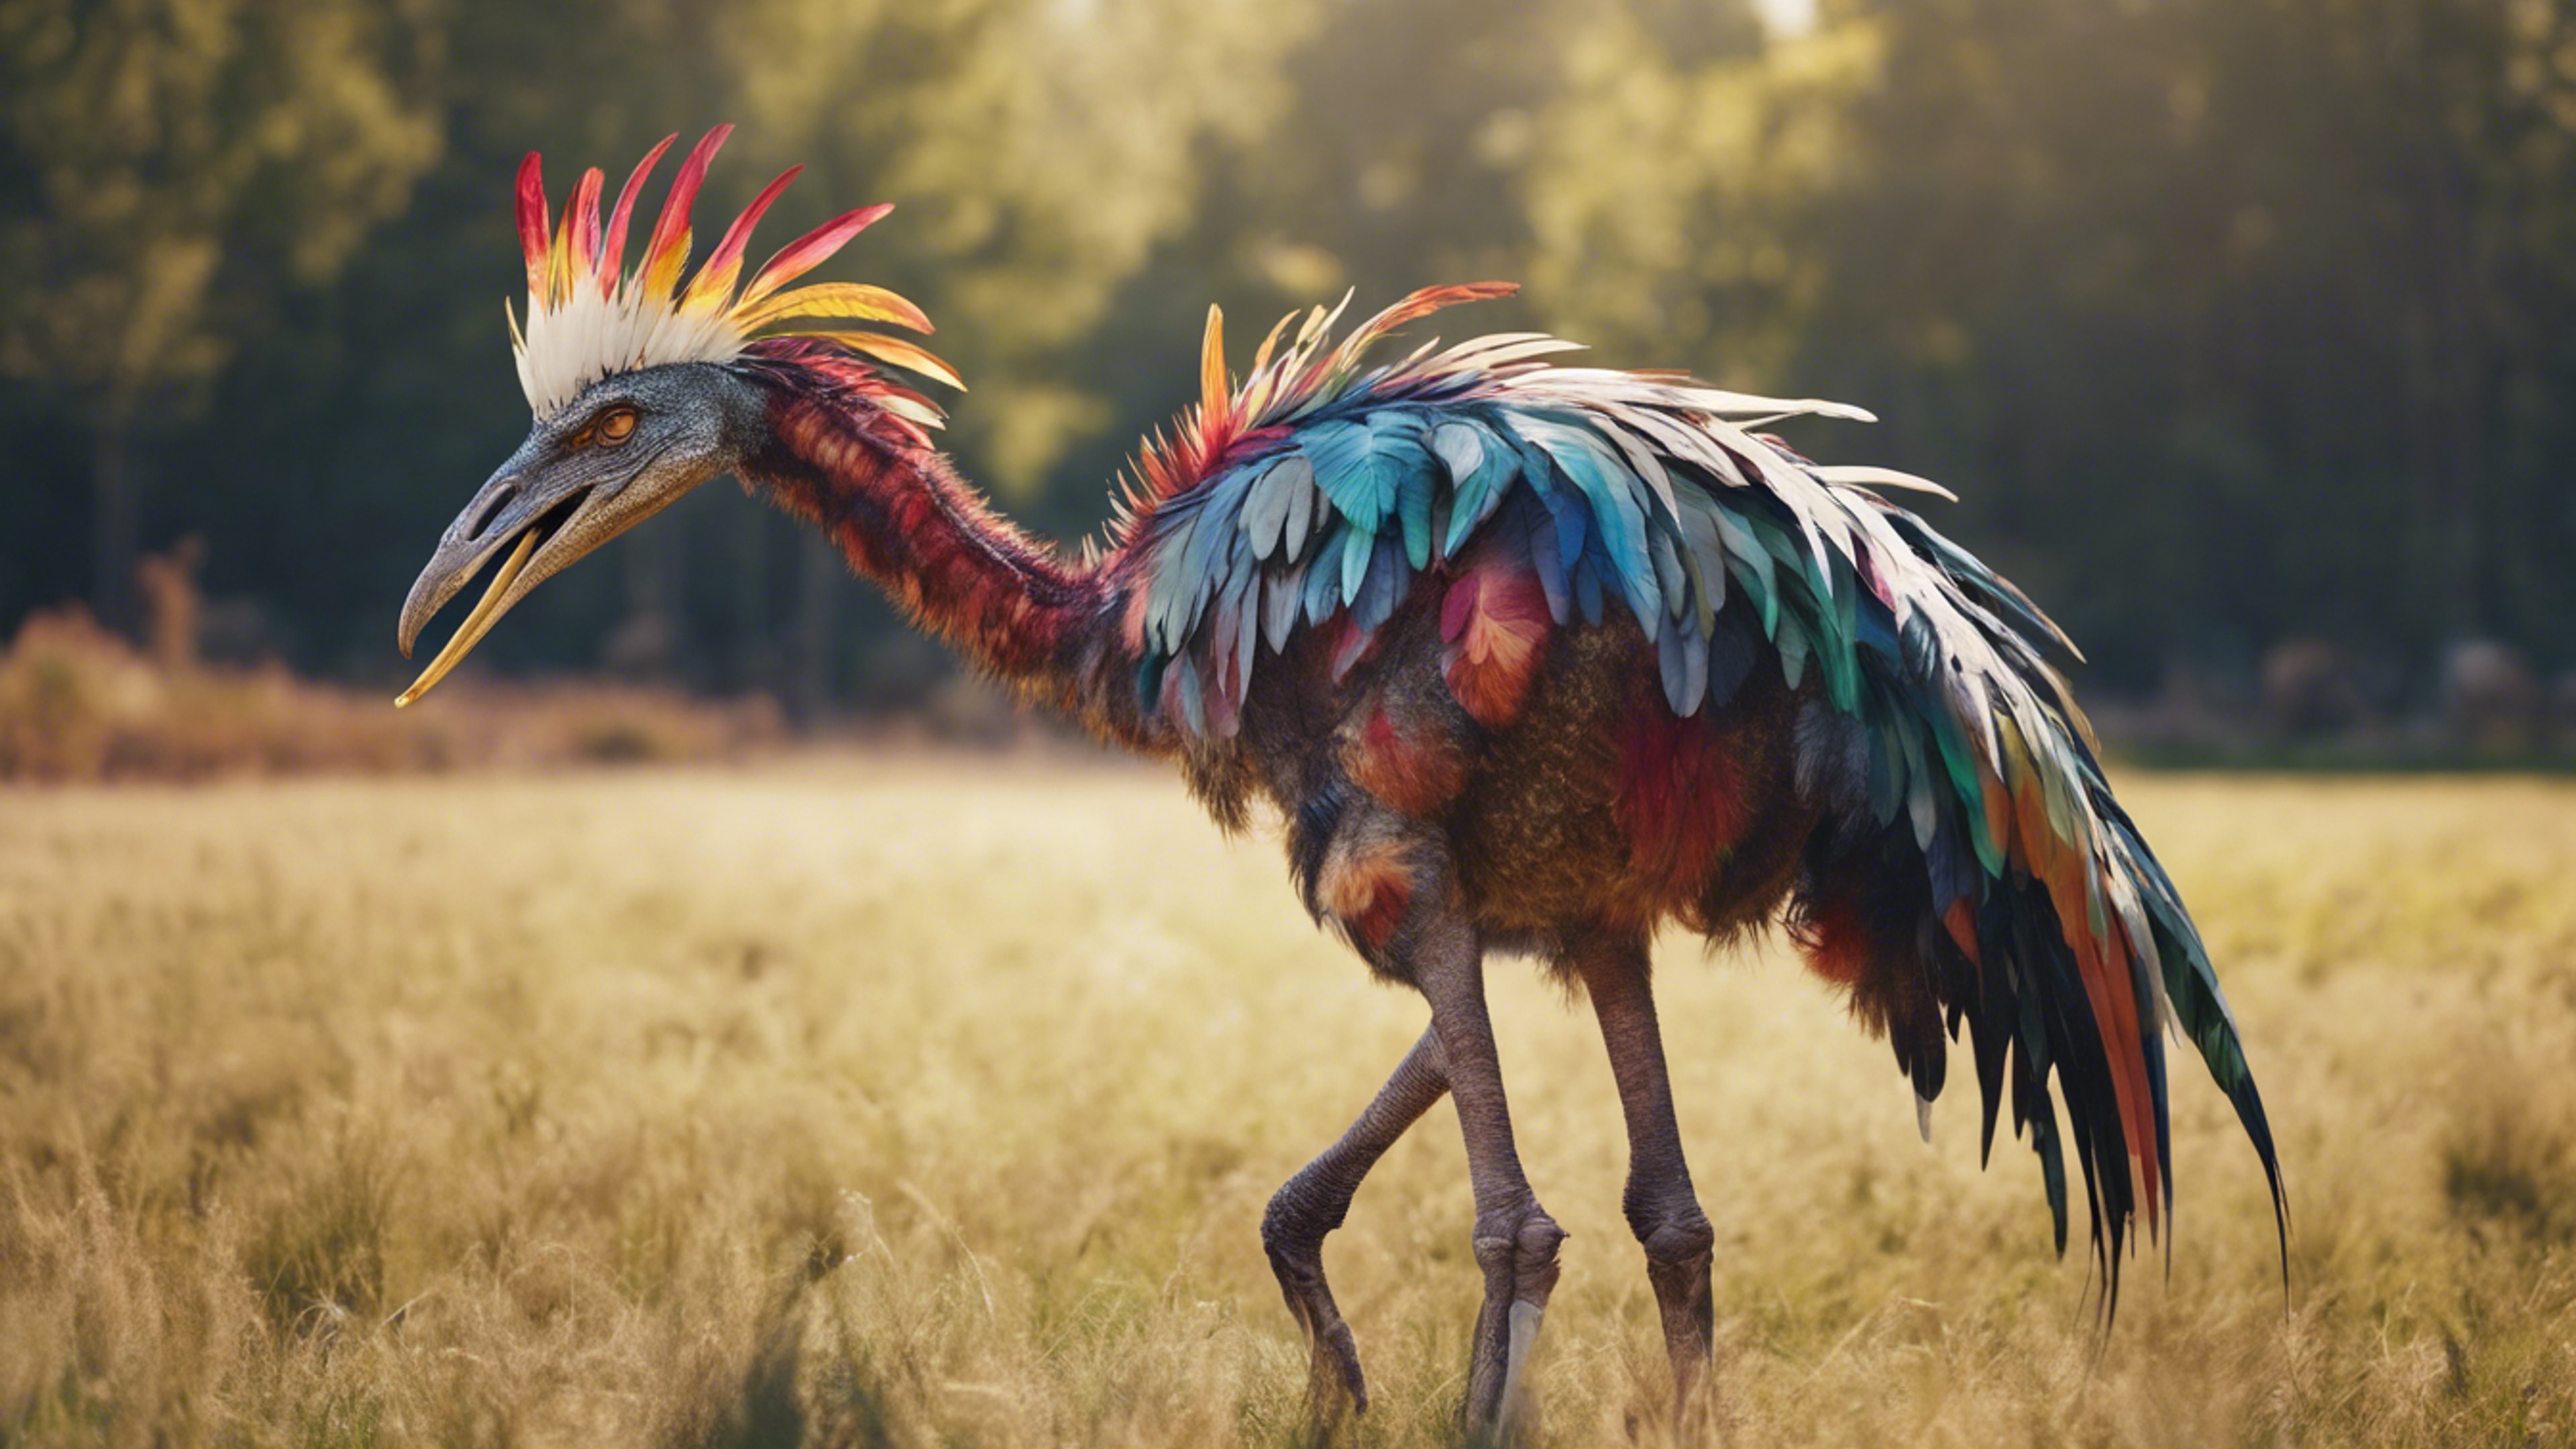 A Struthiomimus with colorful feathers prancing around in an open meadow. Wallpaper[bbeb240df8e5485aba58]